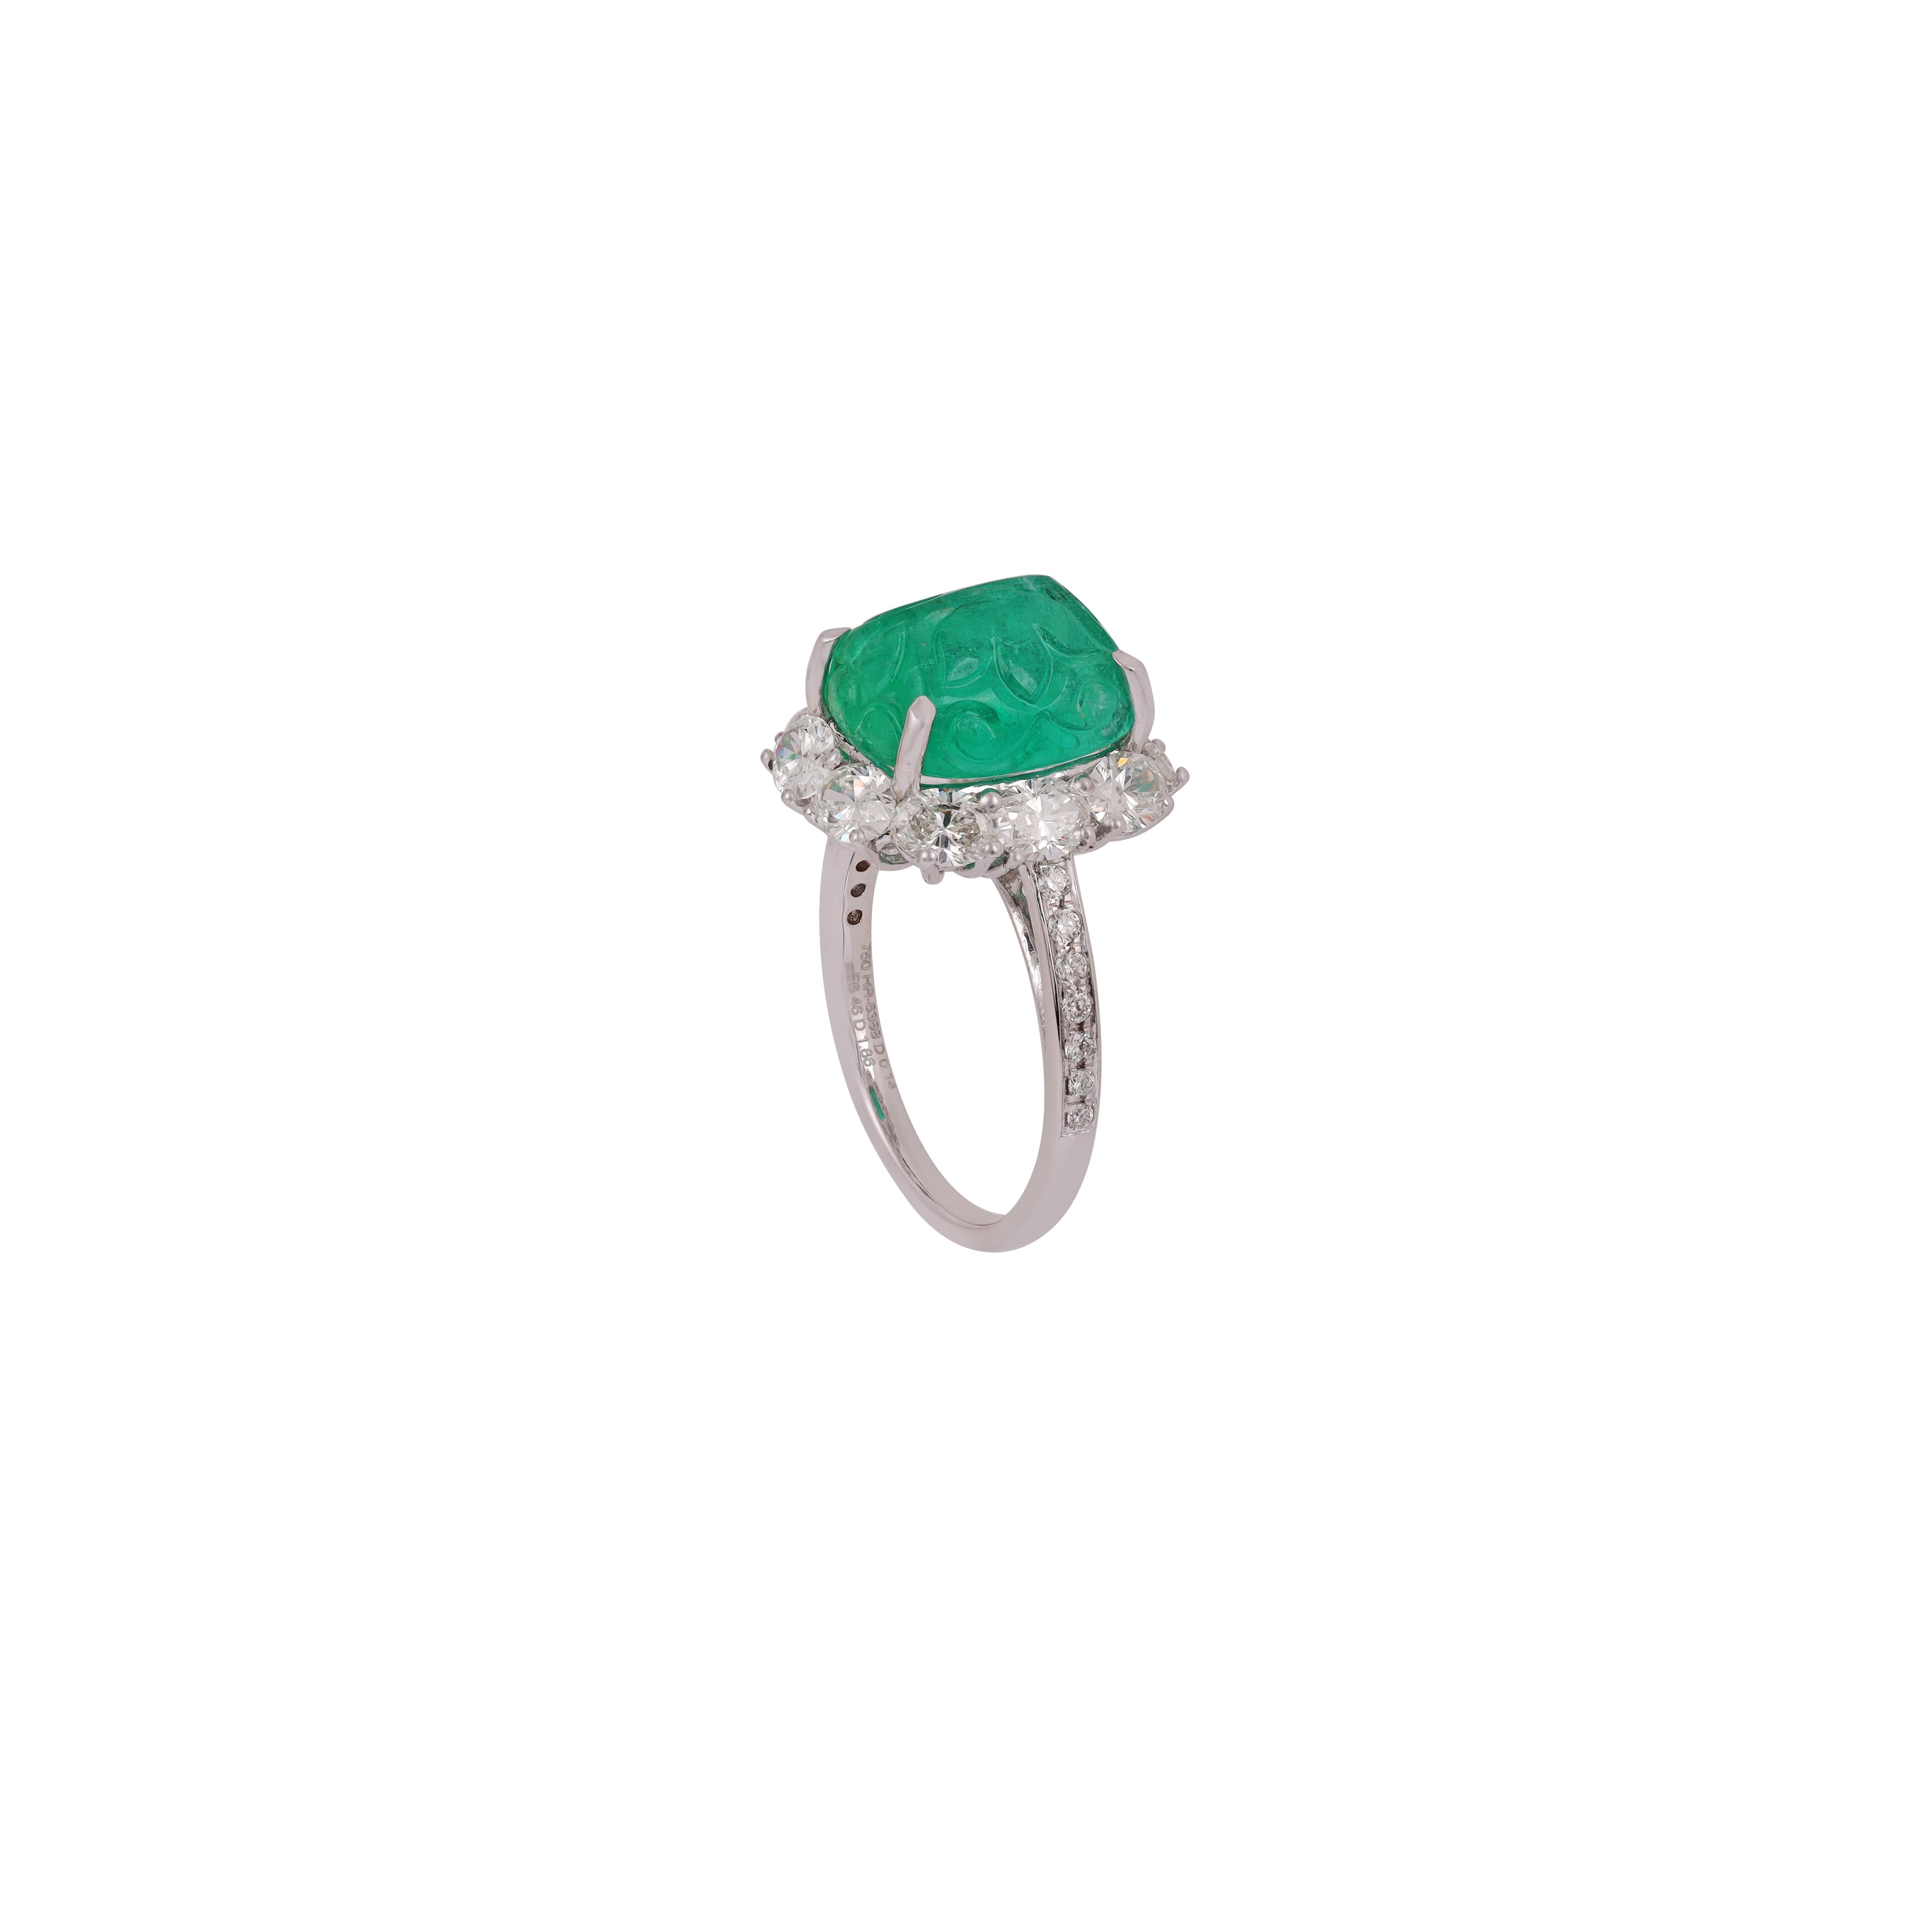 Sugarloaf Cabochon 6.46 Carat Carved Zambian Emerald & Cluster Diamond Ring in 18k White Gold For Sale